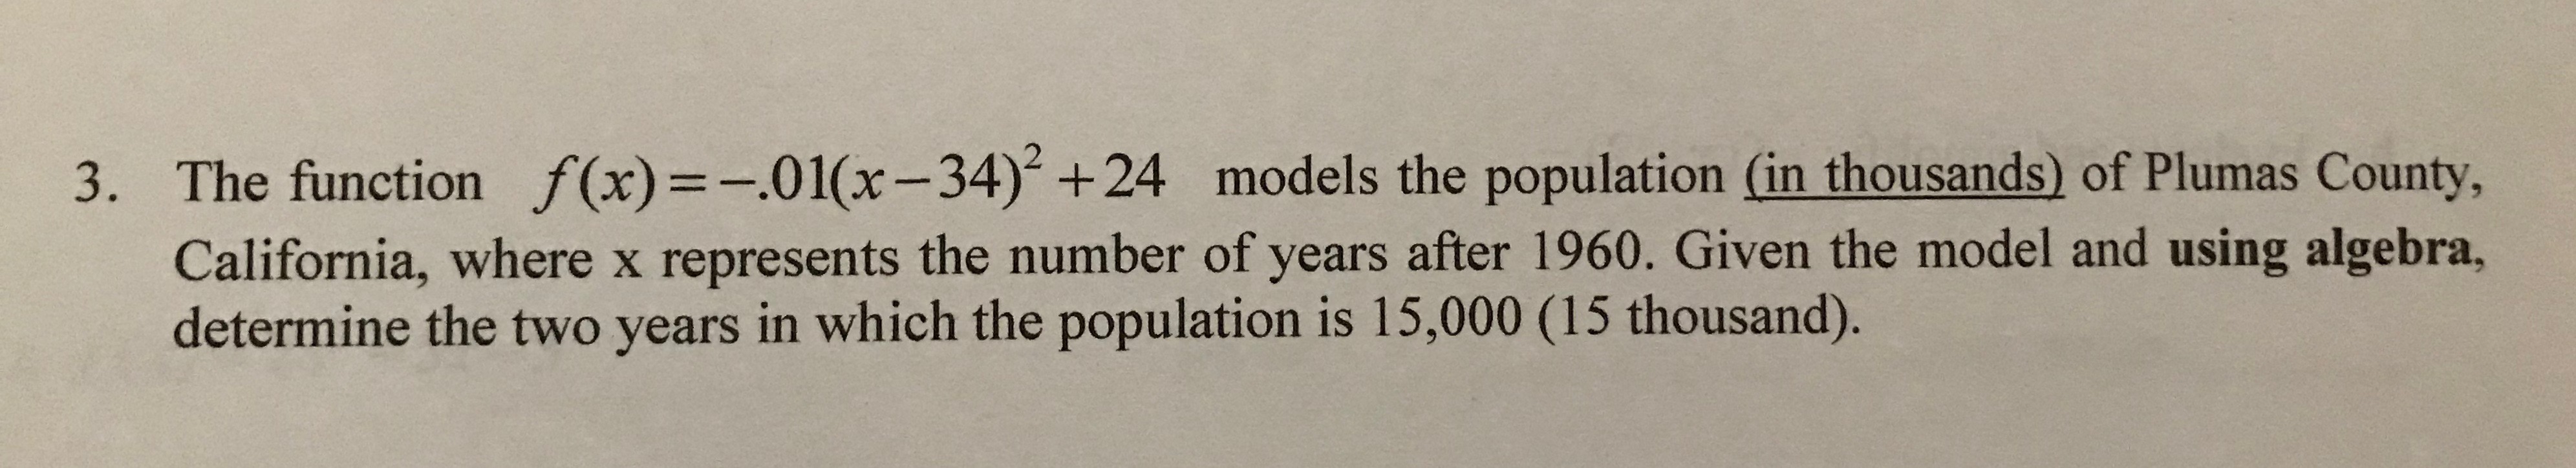 The function f(x)=-.01(x-34) +24 models the population (in thousands) of Plumas County,
3.
California, where x represents the number of years after 1960. Given the model and using algebra,
determine the two years in which the population is 15,000 (15 thousand).
